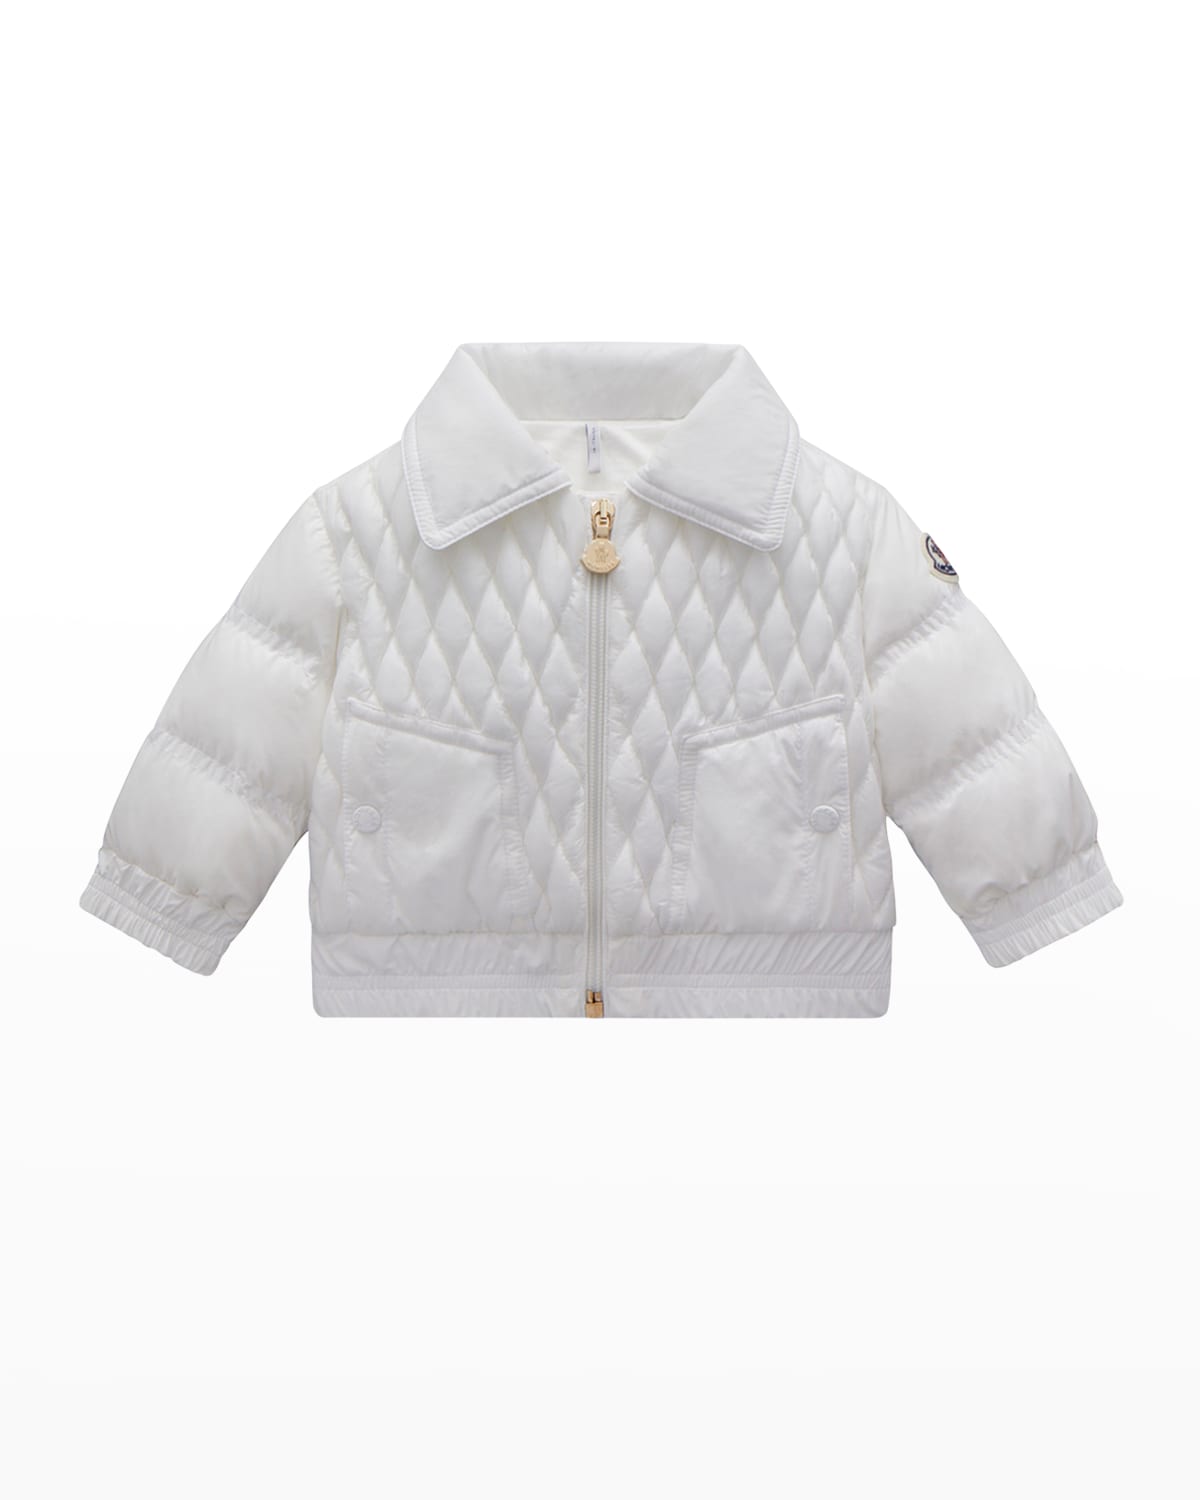 MONCLER GIRL'S ODIT DIAMOND-QUILTED JACKET